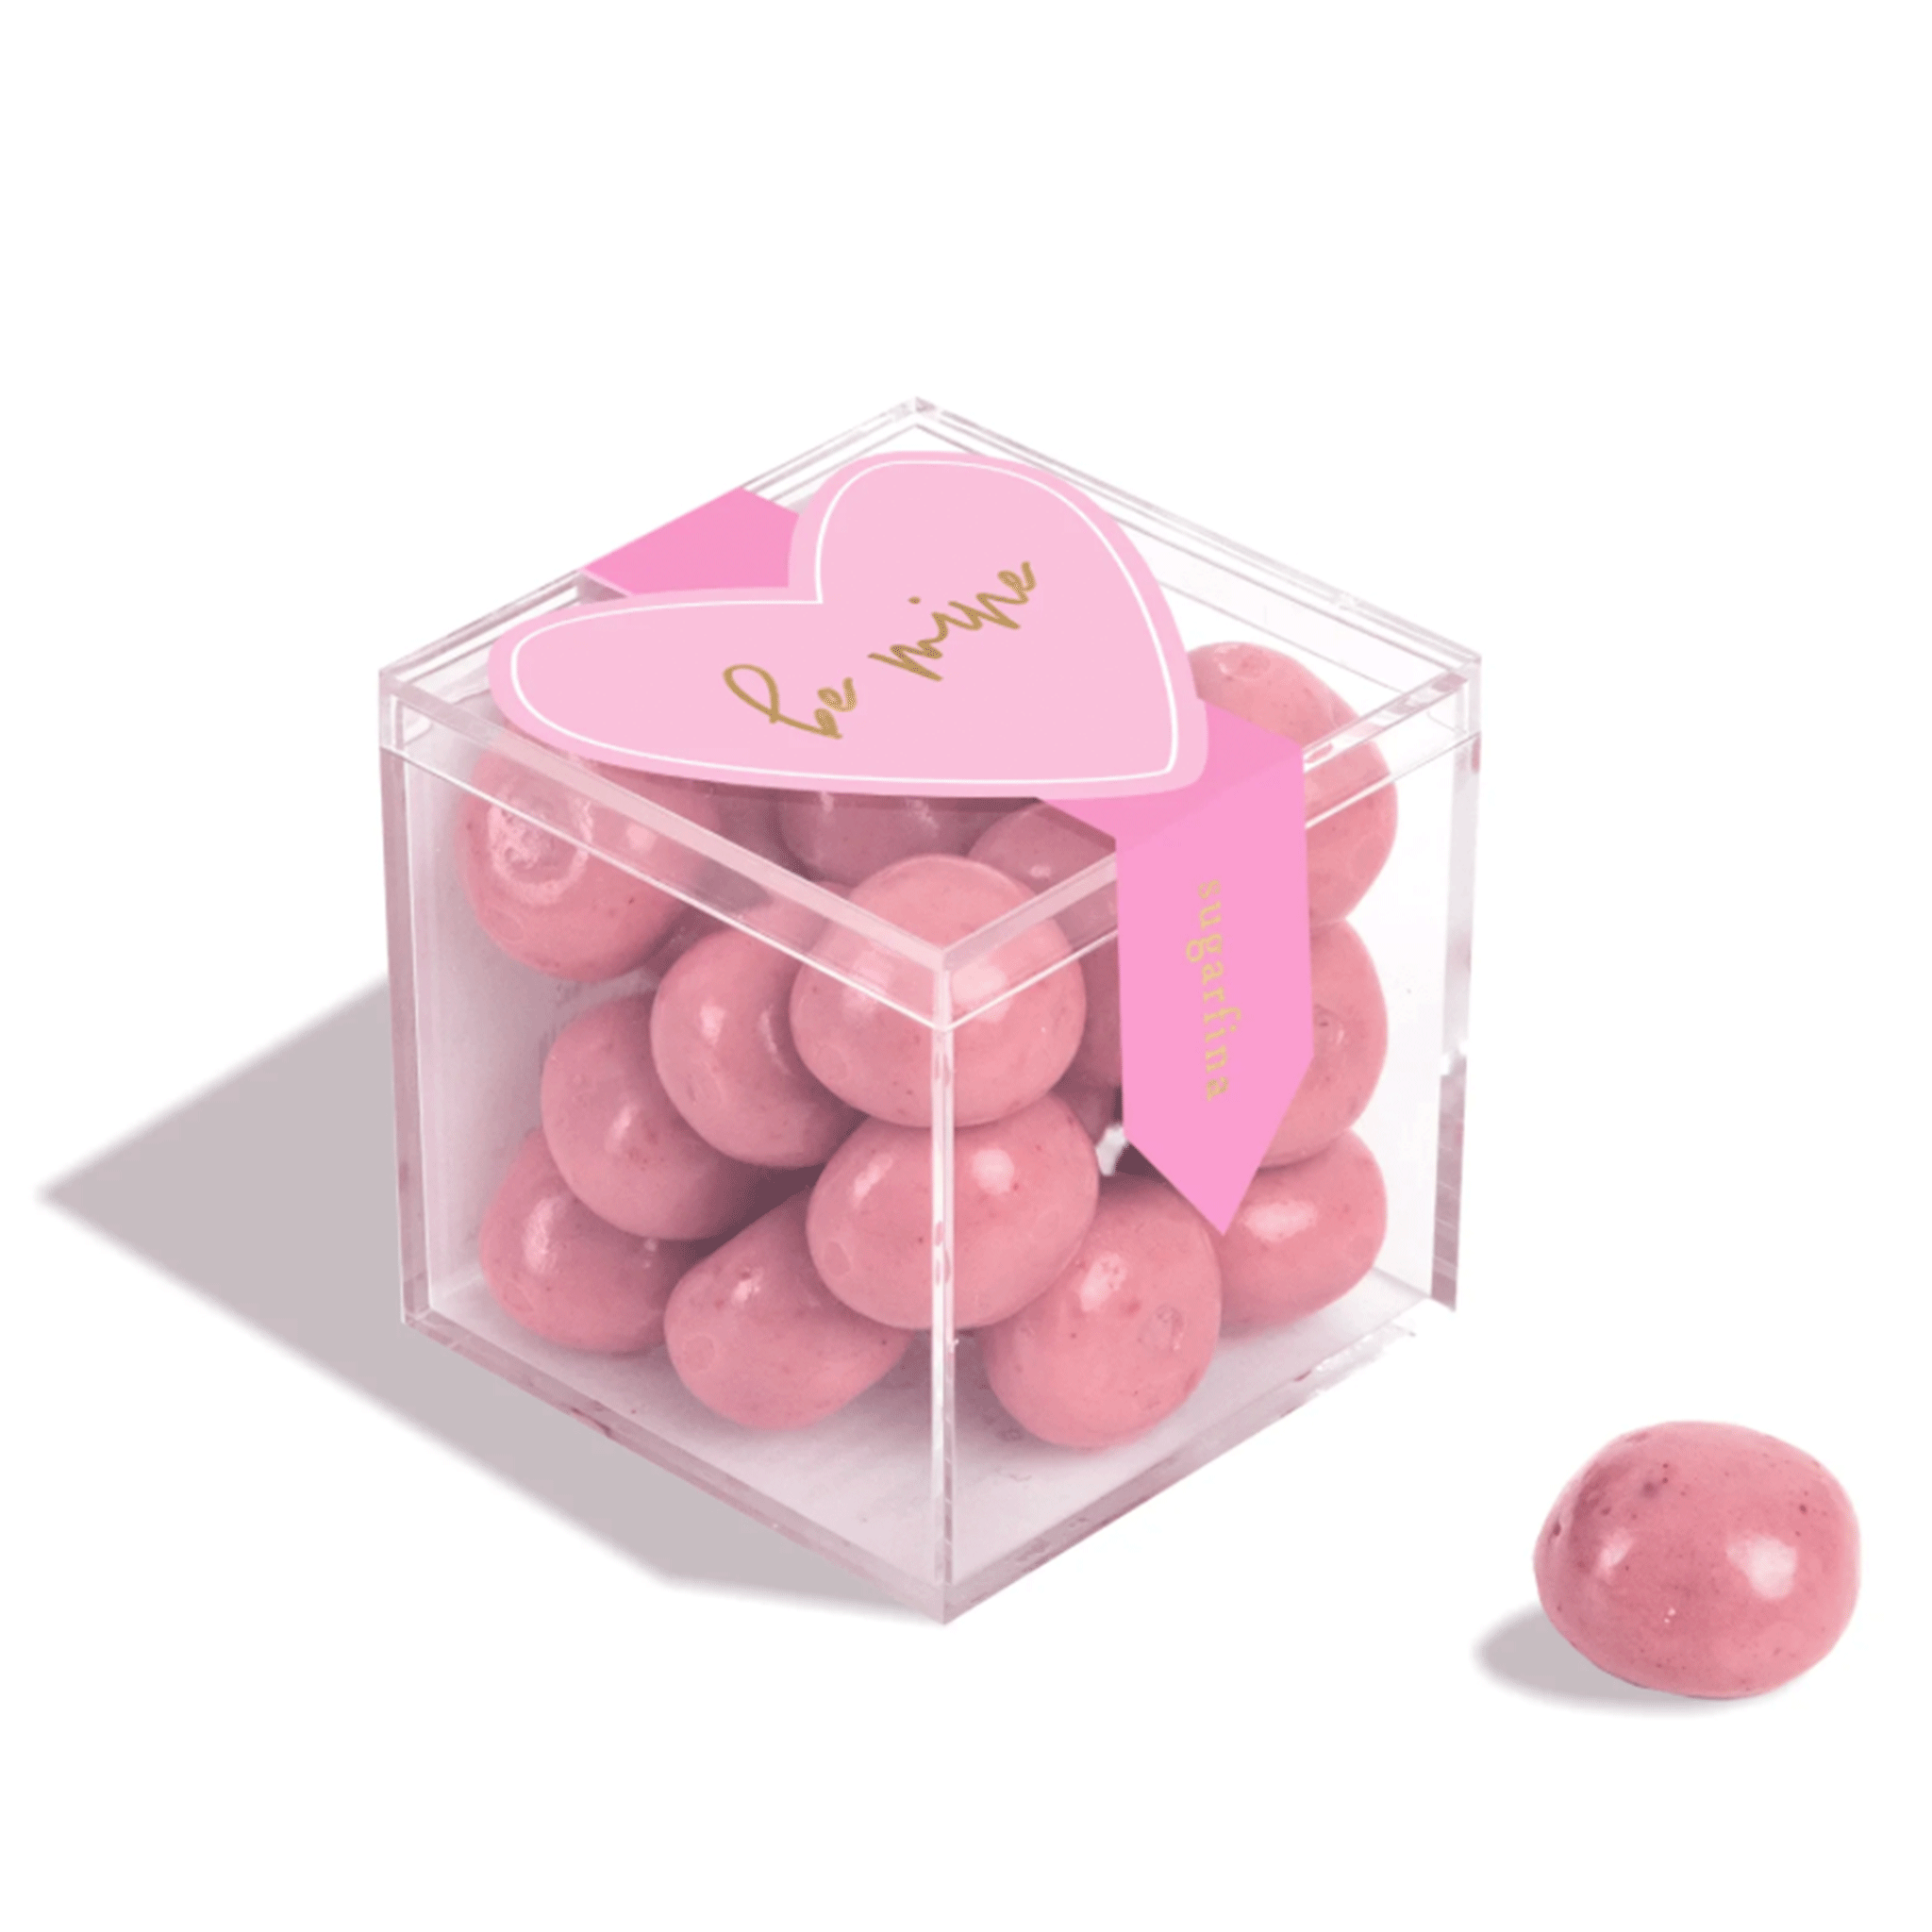 On a white background is a clear acrylic box filled with pink shortcake cookie candies. 